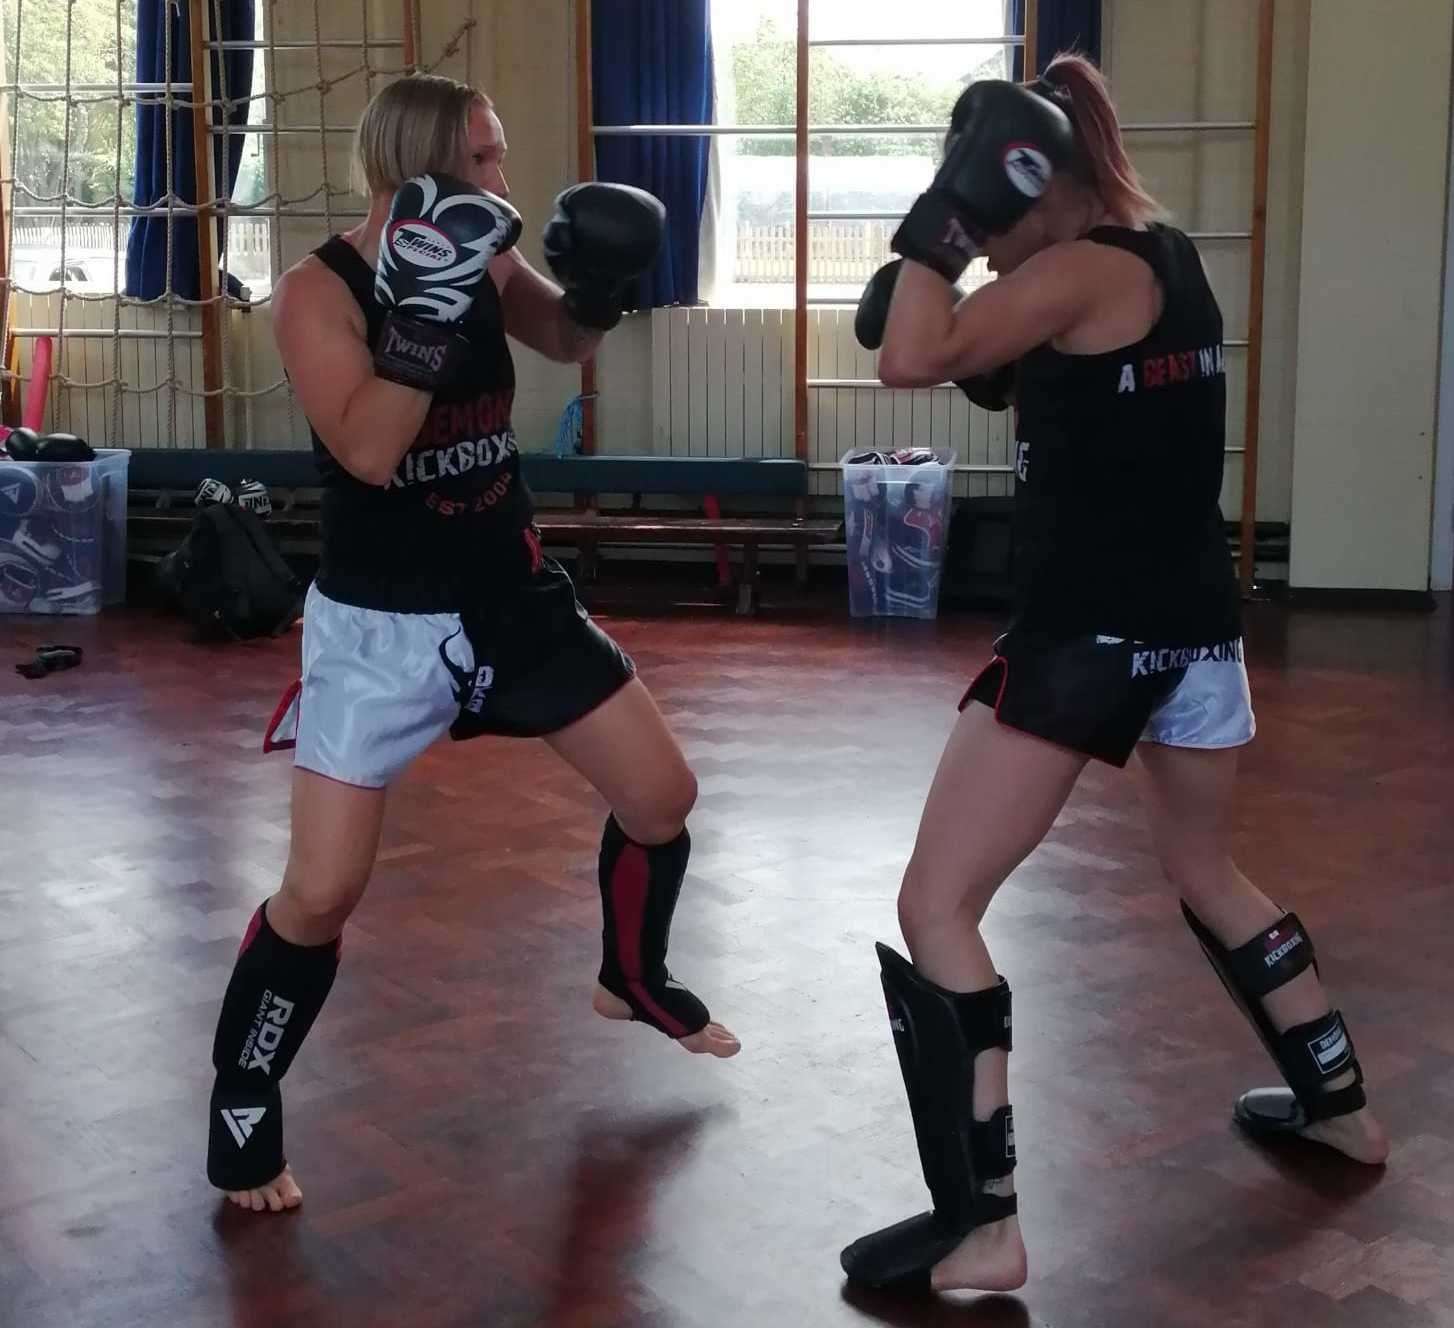 Kickboxing classes are held for both adults and children. Picture: Denise Elliott